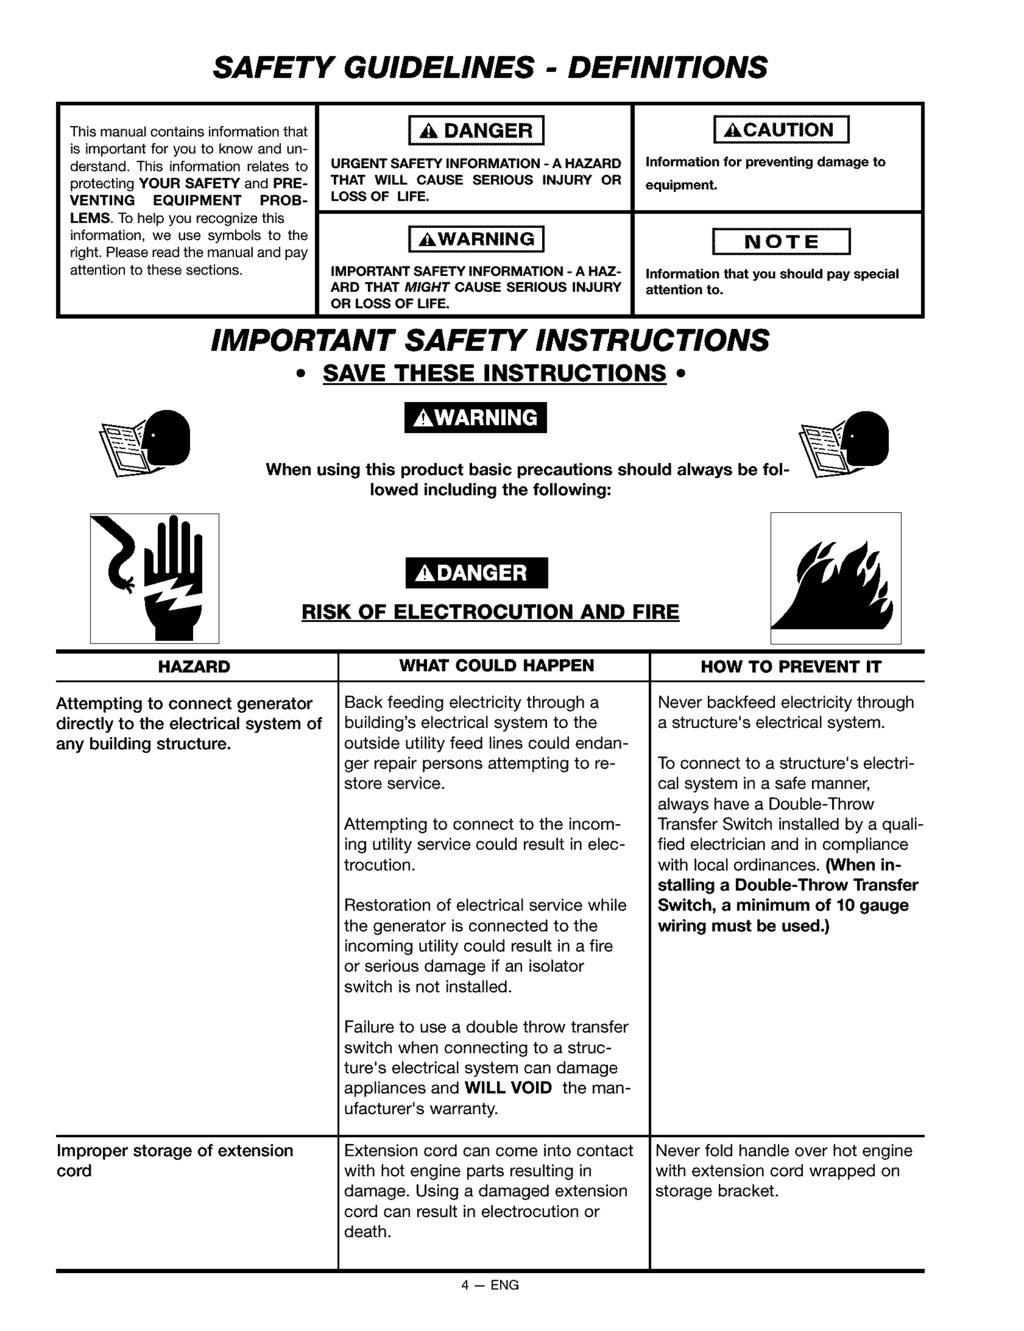 SAFETY GUIDELINES - DEFINITIONS This manual contains information that is important for you to know and understand.